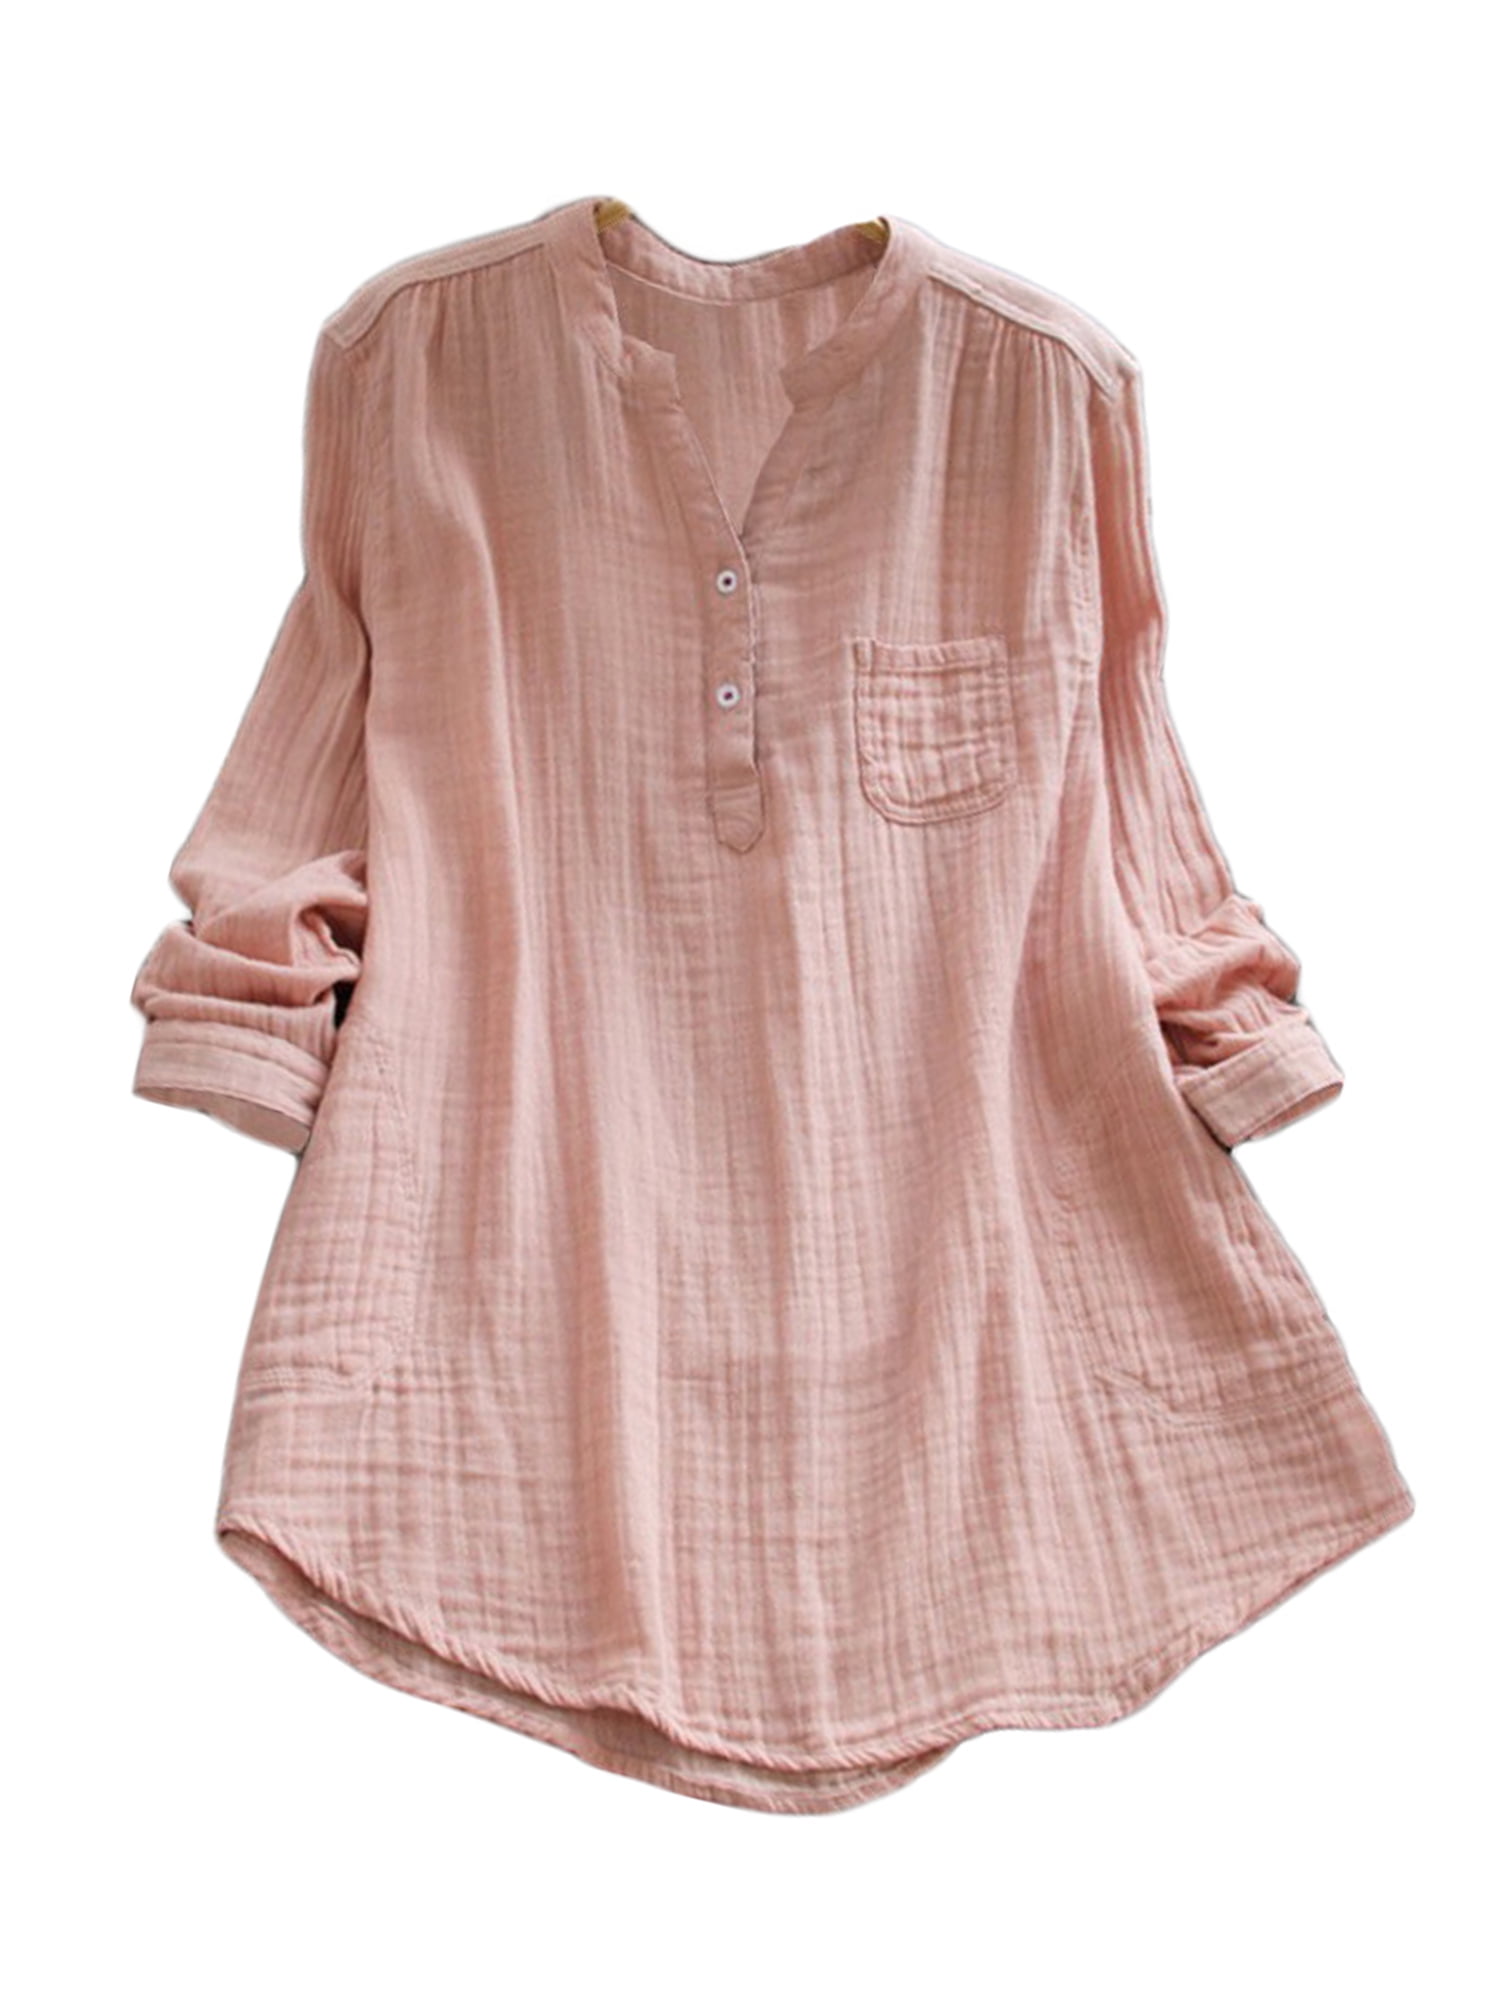 Women's Linen Shirts 3/4 Ruffle Sleeve Loose Breathable Tunic Blouses Casual V Neck Summer Tops